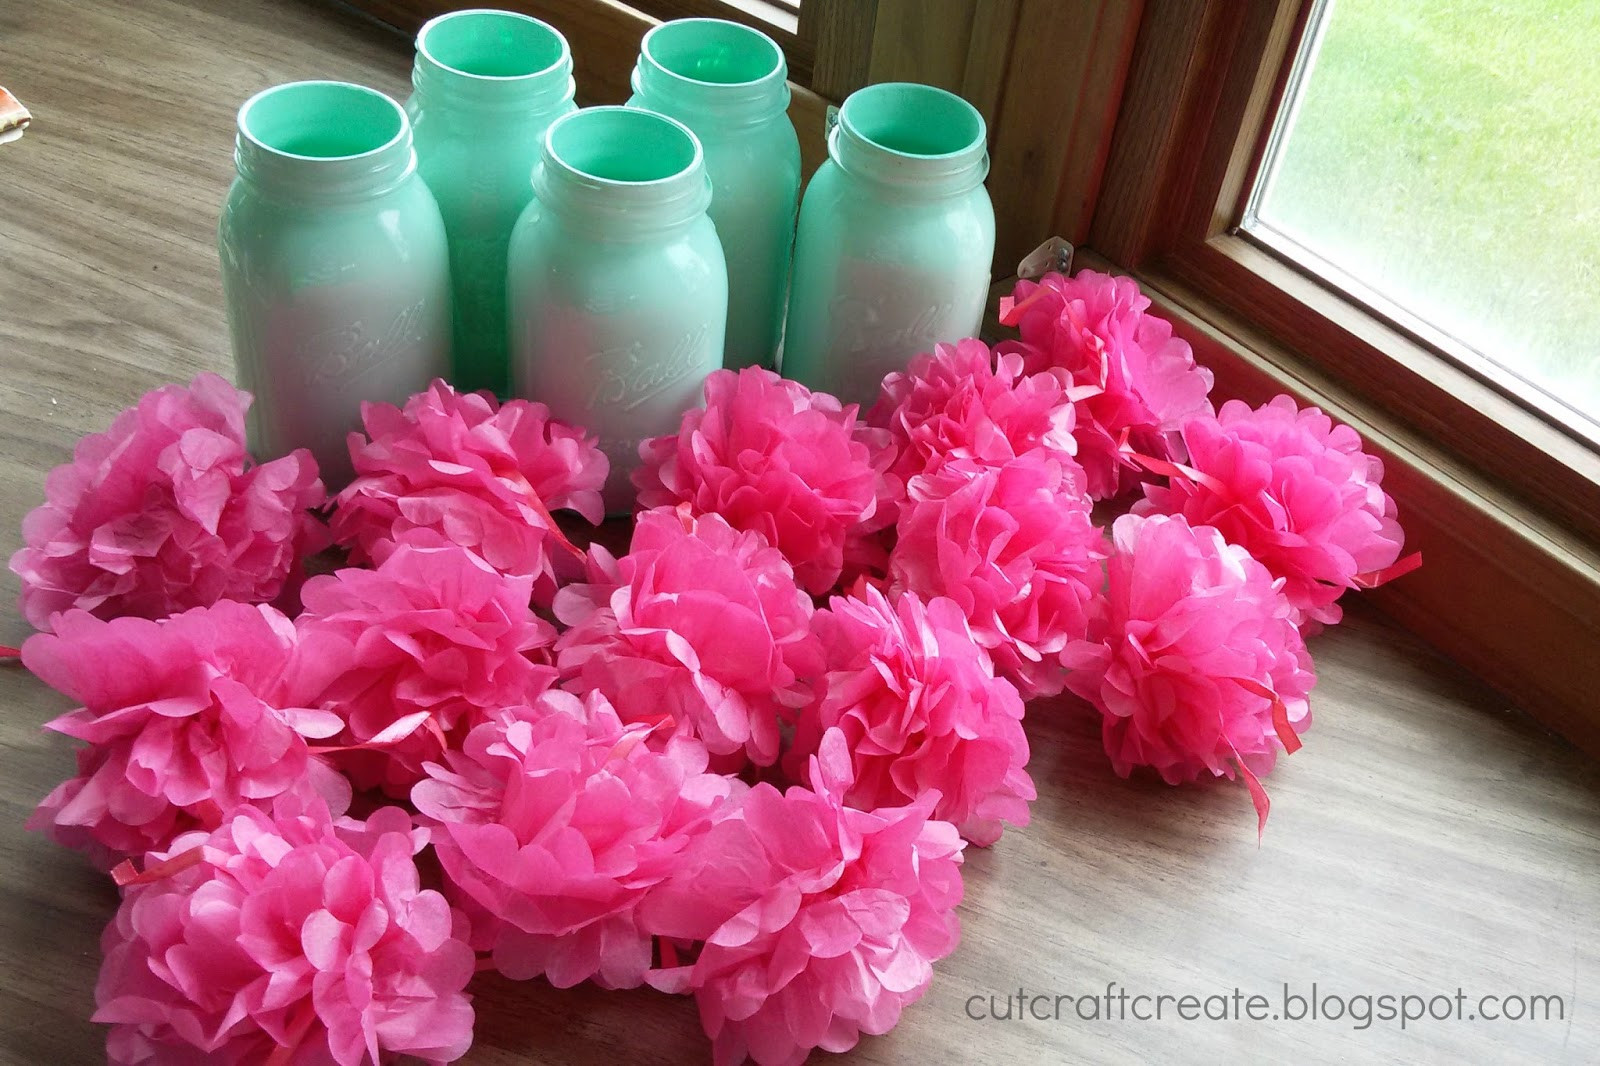 28 Elegant Mod Podge Glitter Vase 2024 free download mod podge glitter vase of cut craft create pom pom flower mason jars in with a hot glue gun glue the lid and ring from the mason jar together dont get glue on the threading though because yo